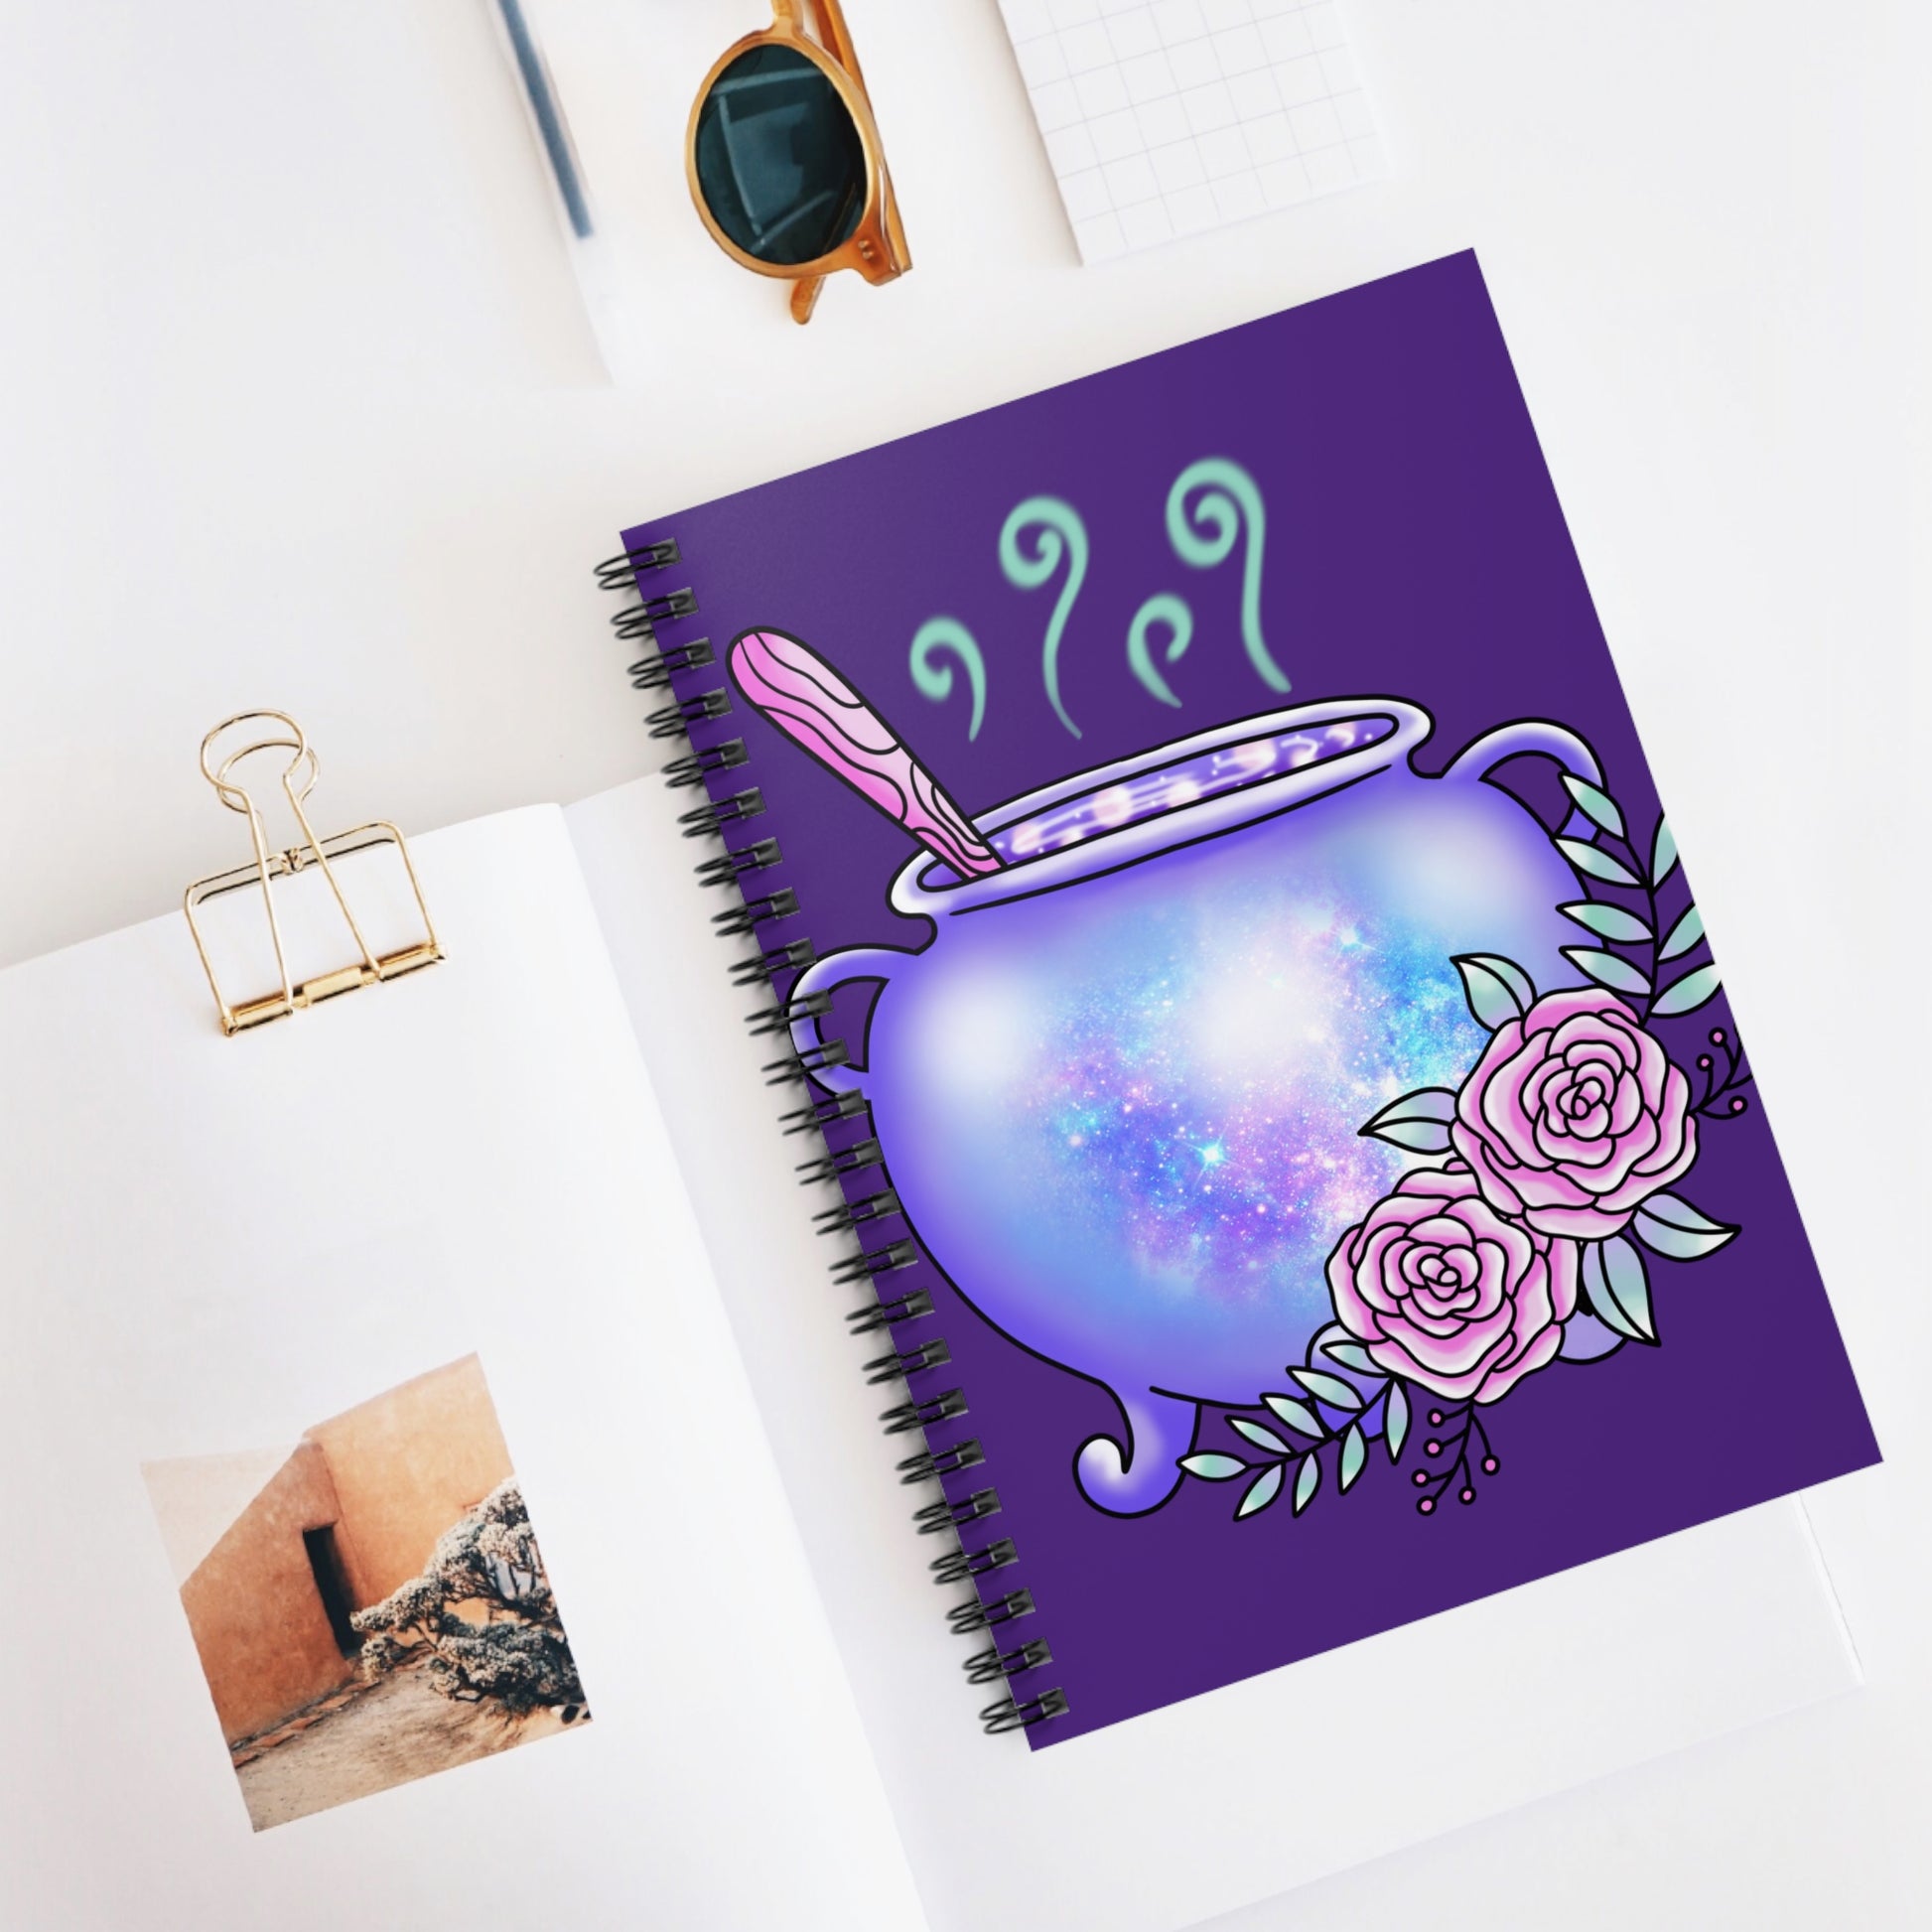 Cauldron Brew - I Love You: Spiral Notebook - Log Books - Journals - Diaries - and More Custom Printed by TheGlassyLass